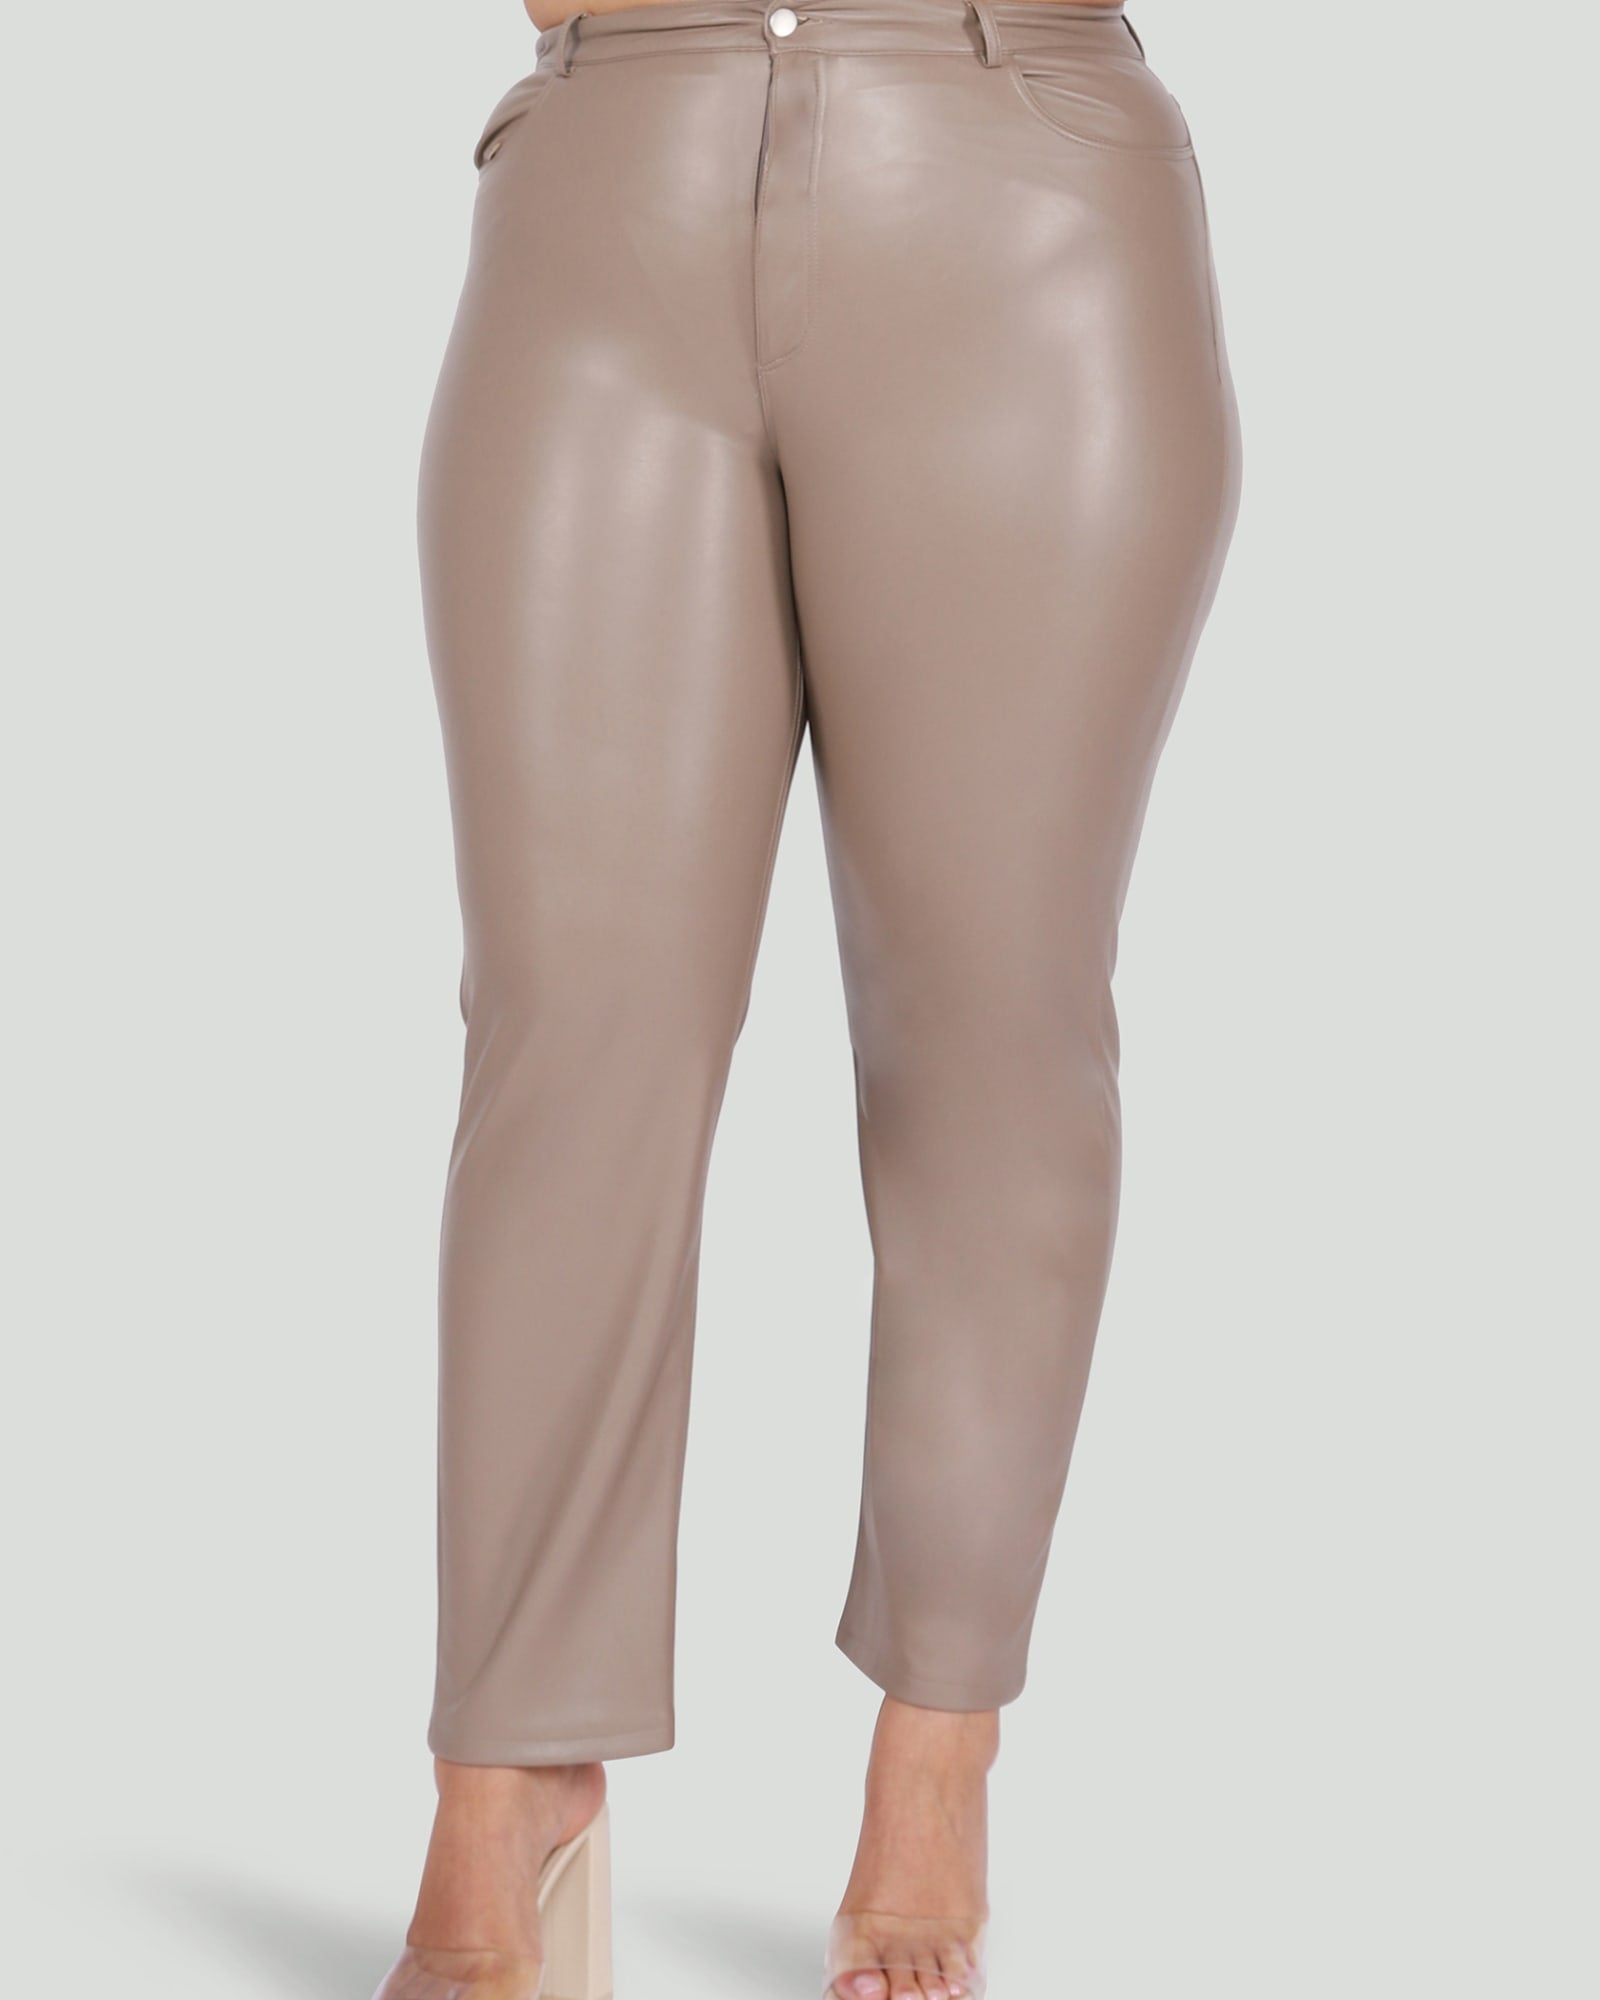 Sleek, clean lined women's leather pants in a summer weight leather.